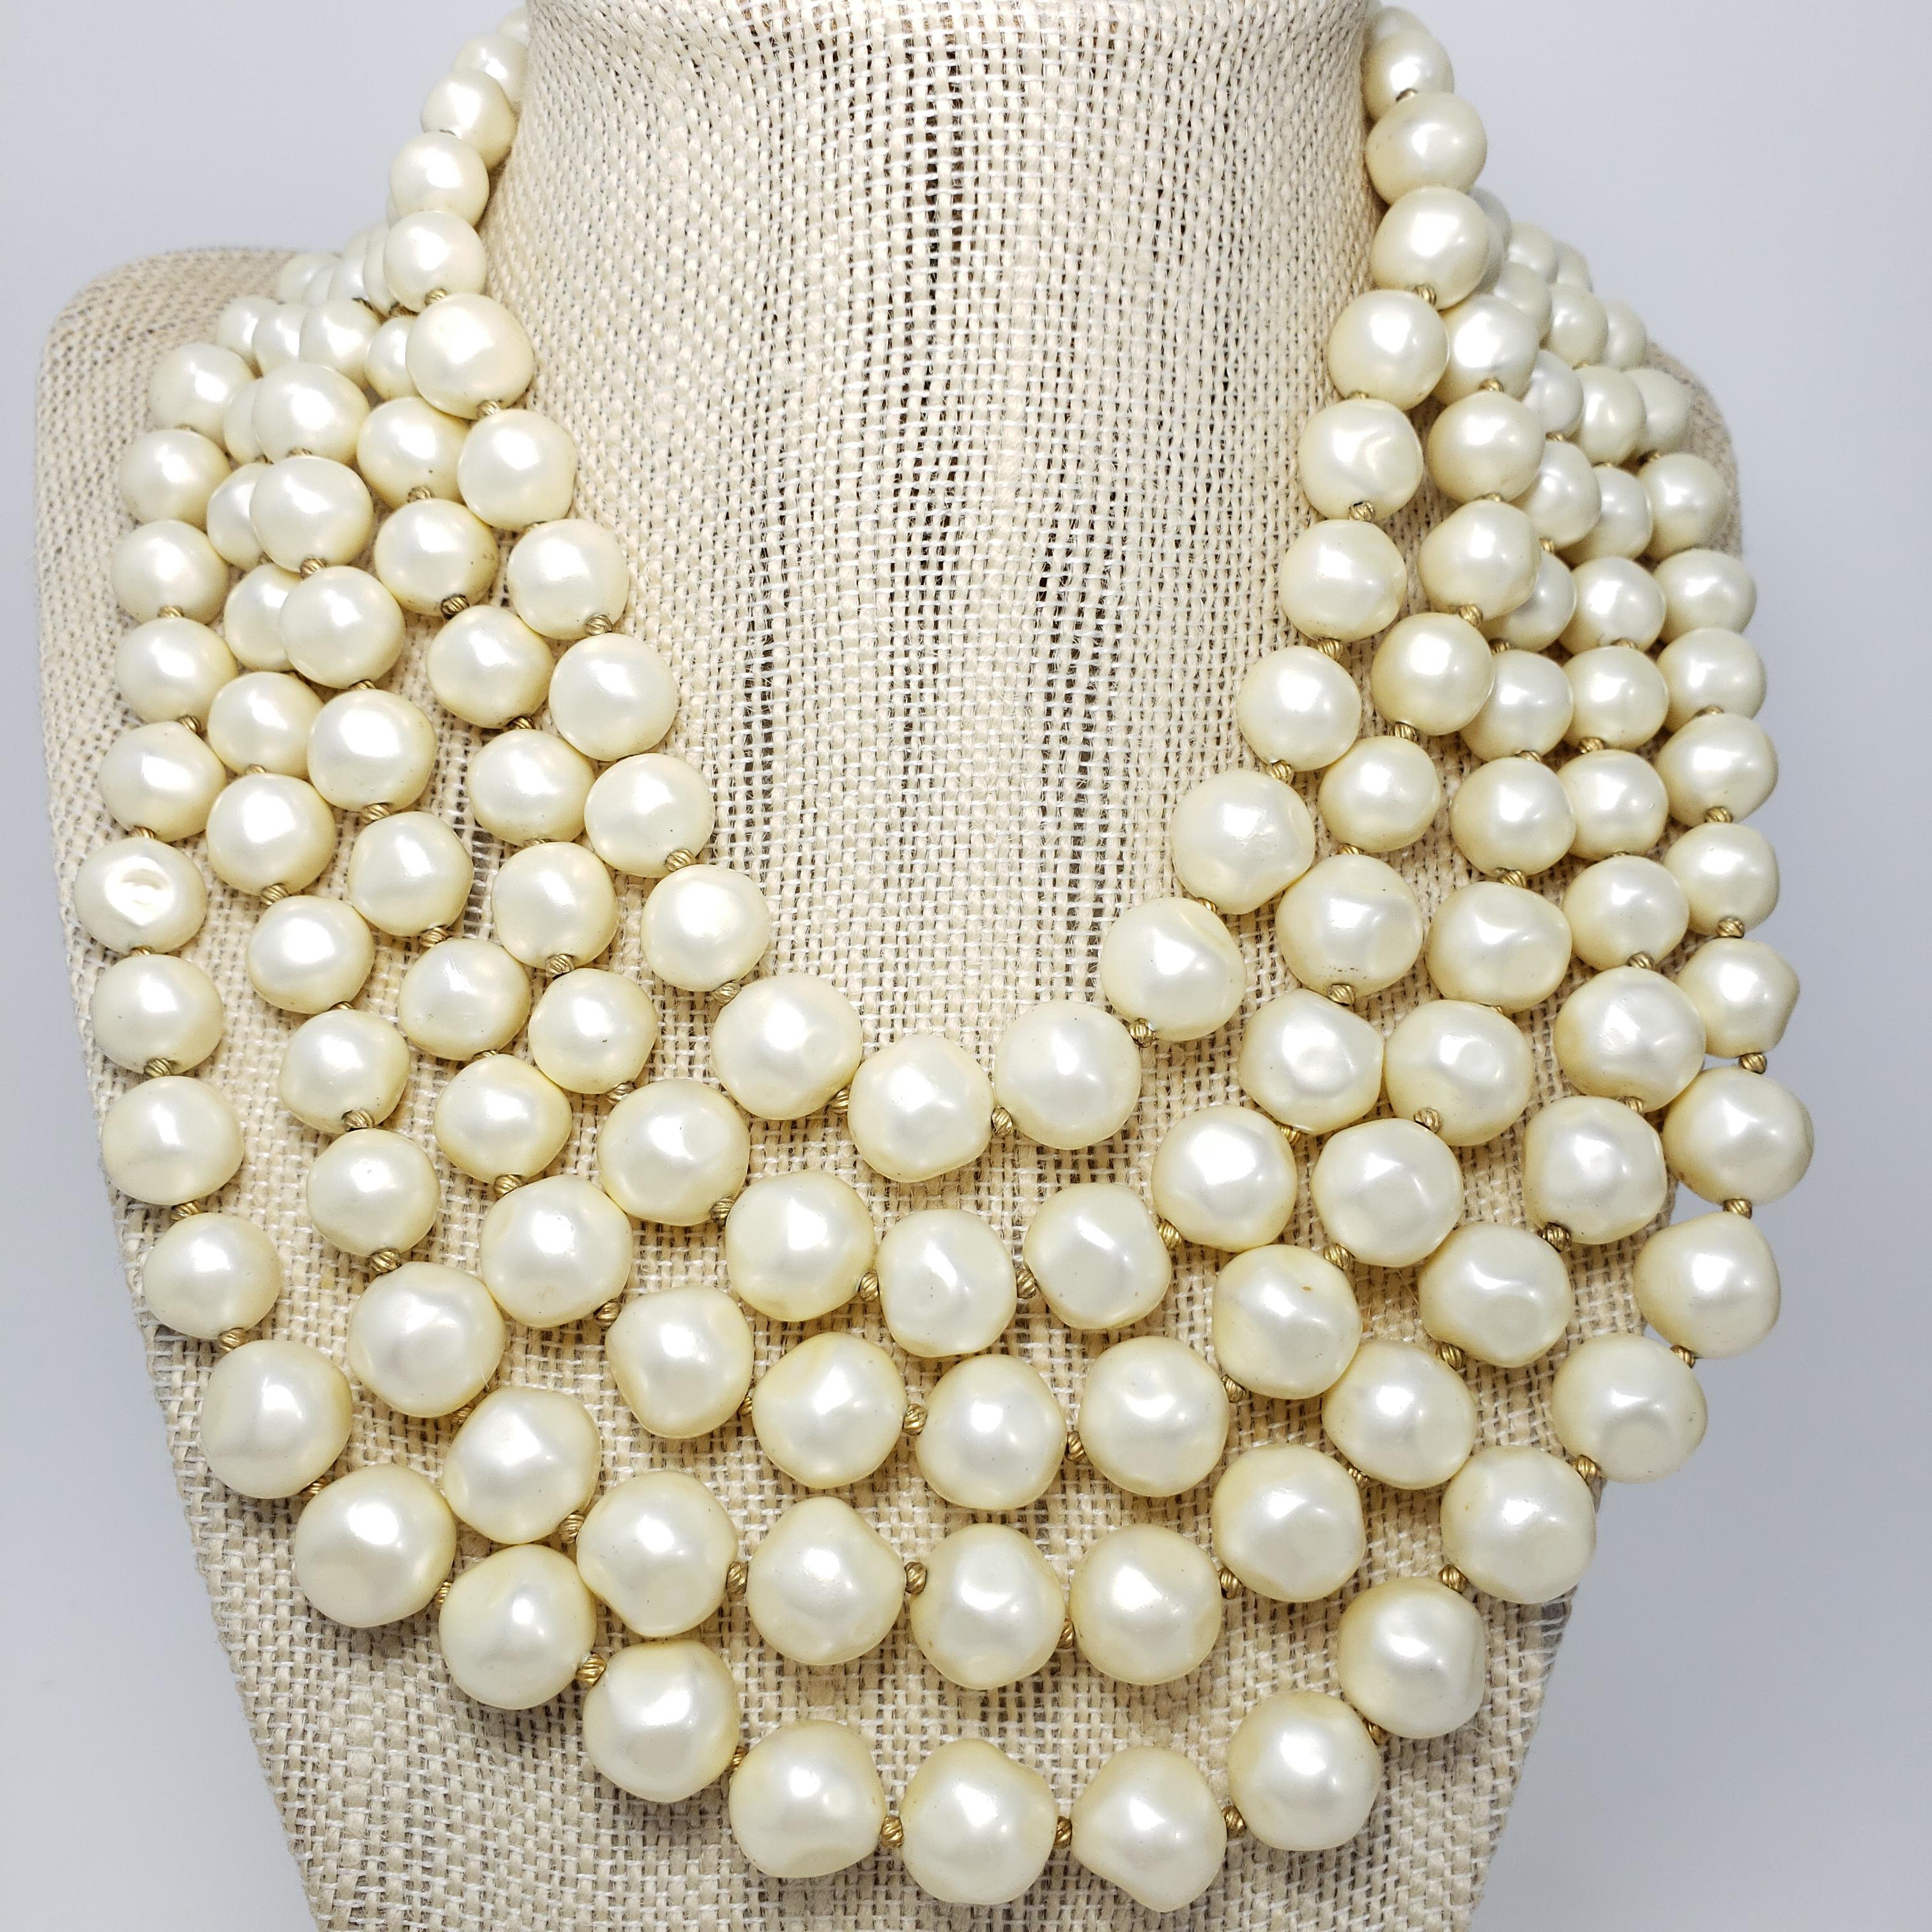 A luxurious multi-strand necklace by Marvella. Features five strands of graduated faux pearls. The colorful clasp features a centerpiece faux mother of pearl, decorated with faux seeded pearls and polished mottled salmon, turquoise, and deep blue